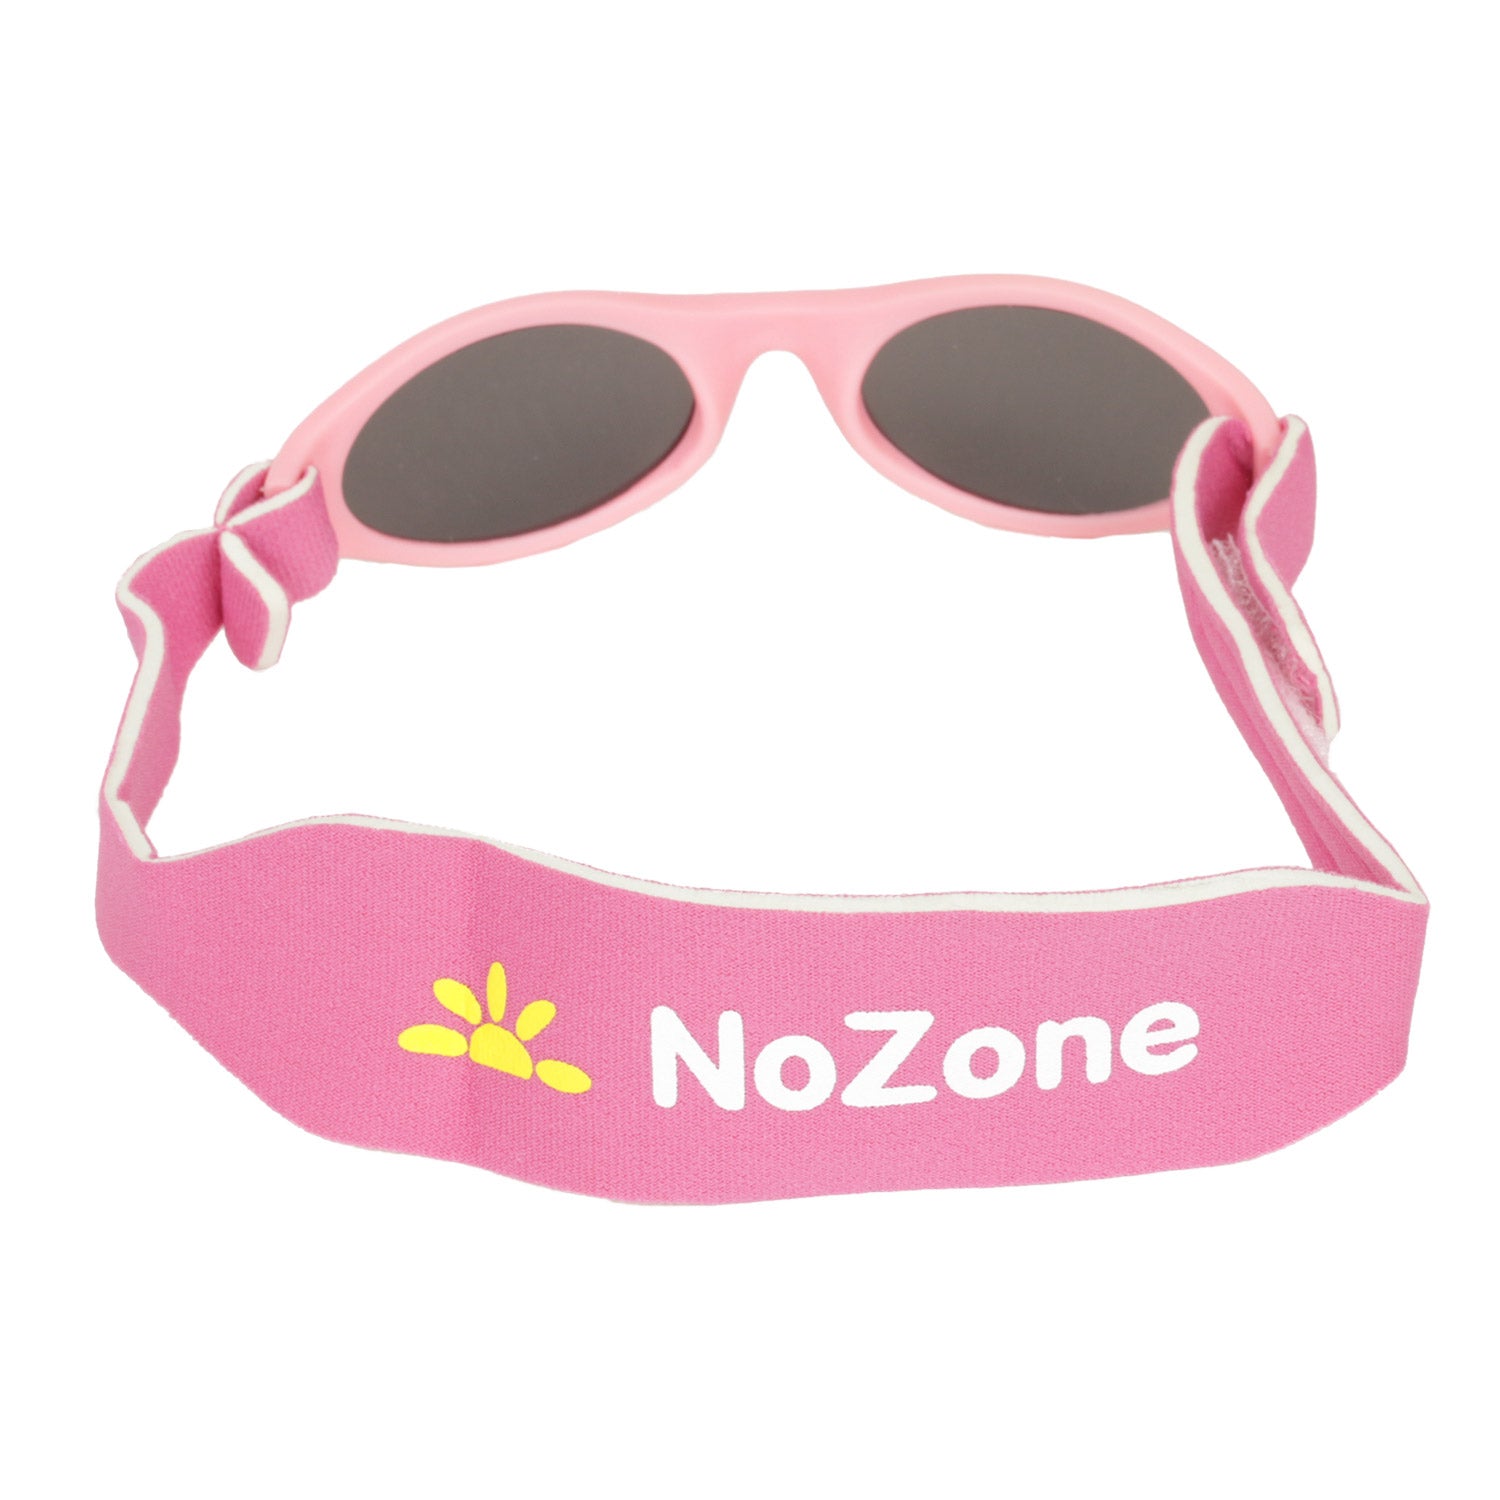 Baby Shades - Sunglasses for Toddlers